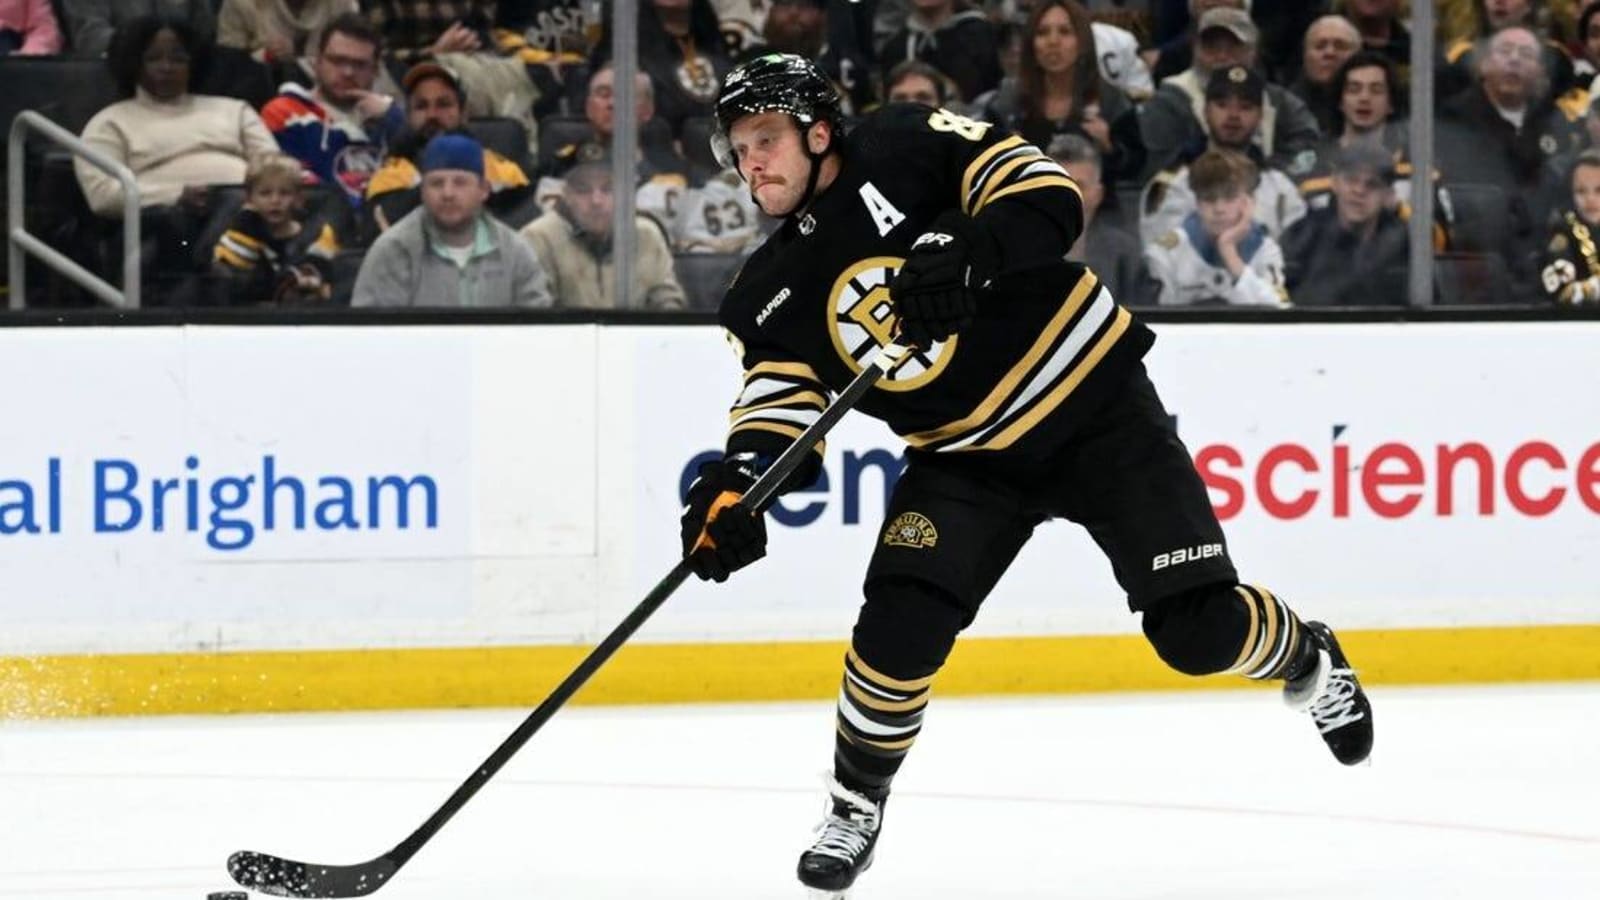 Bruins out to avenge OT loss to rival Canadiens